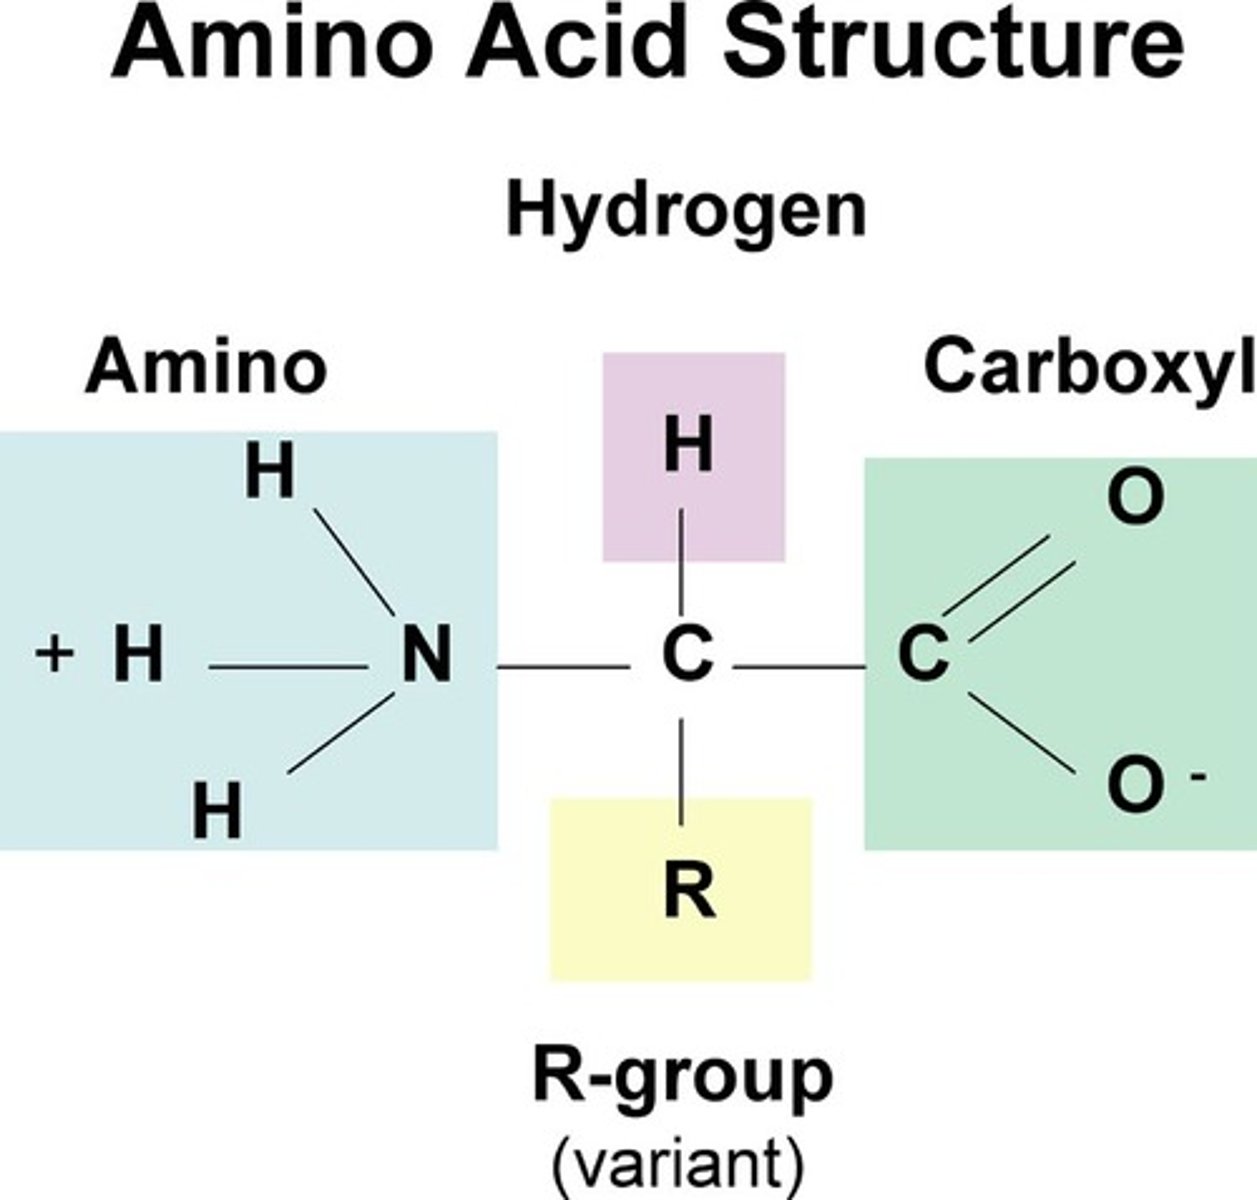 <p>building block (monomer) of proteins, composed of an amino group and a carboxyl group, a hydrogen atom, and an R-group</p>